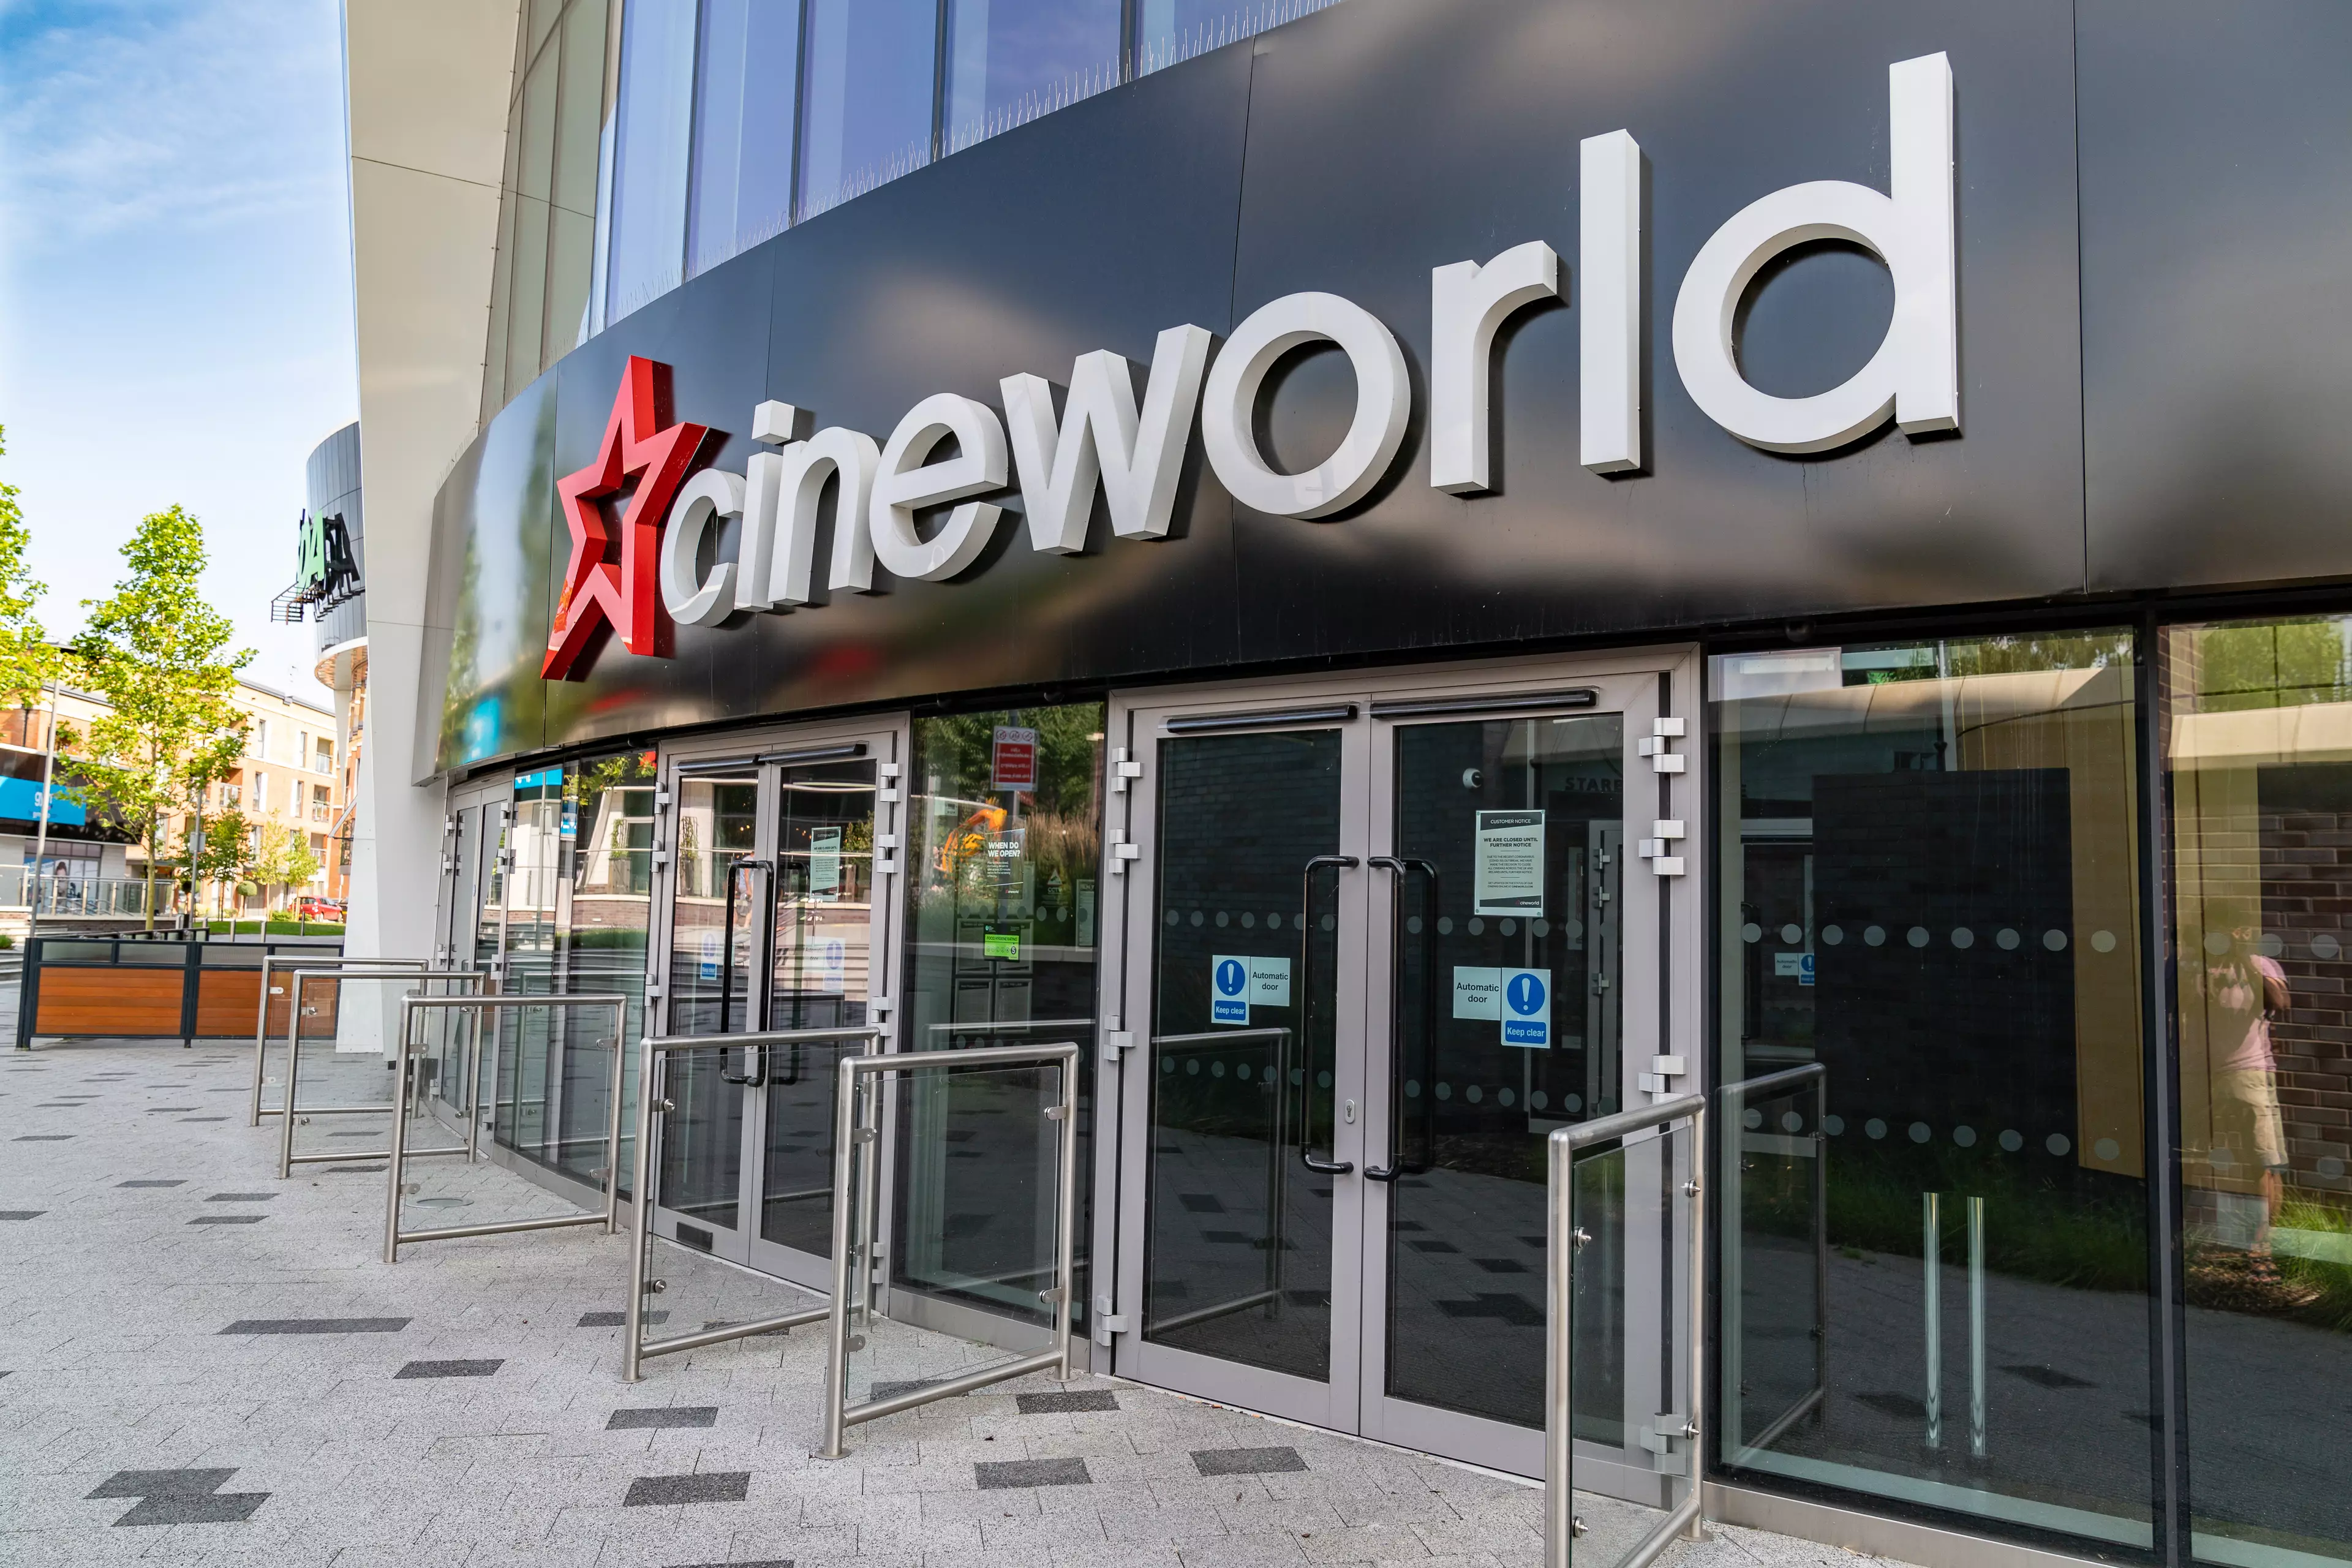 Cineworld reopens on 17th May (